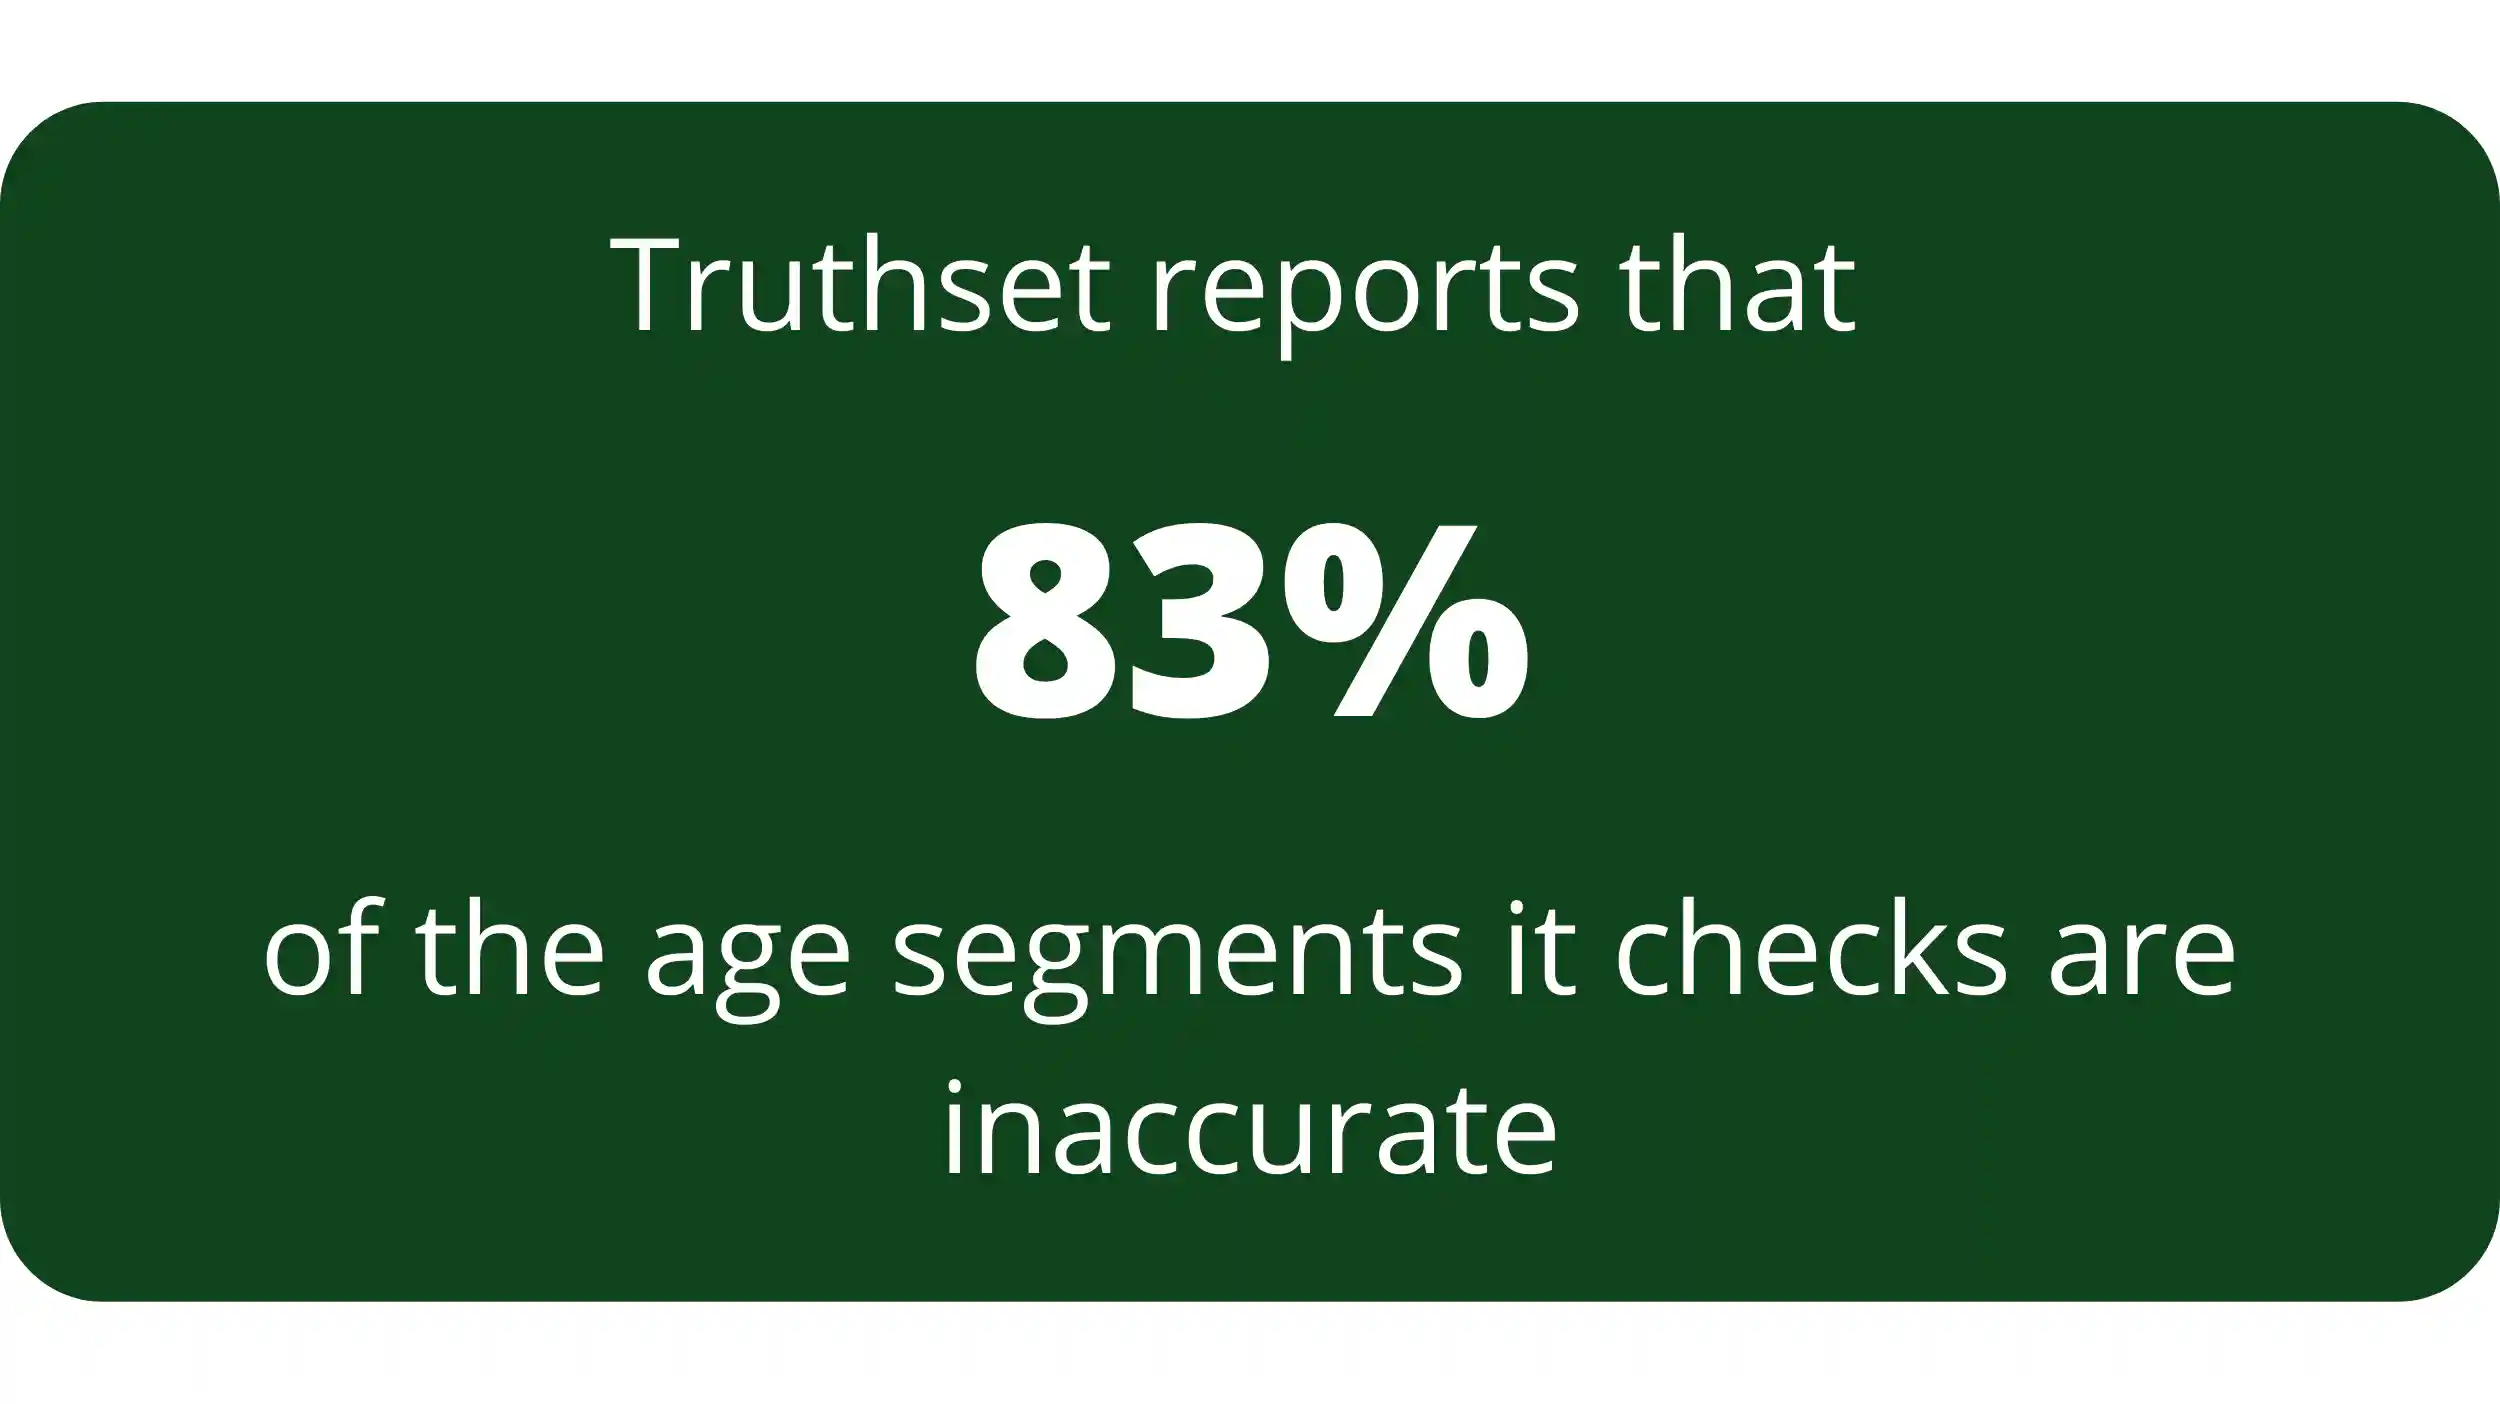 Truthset reports that 83% of age segments are inaccurate